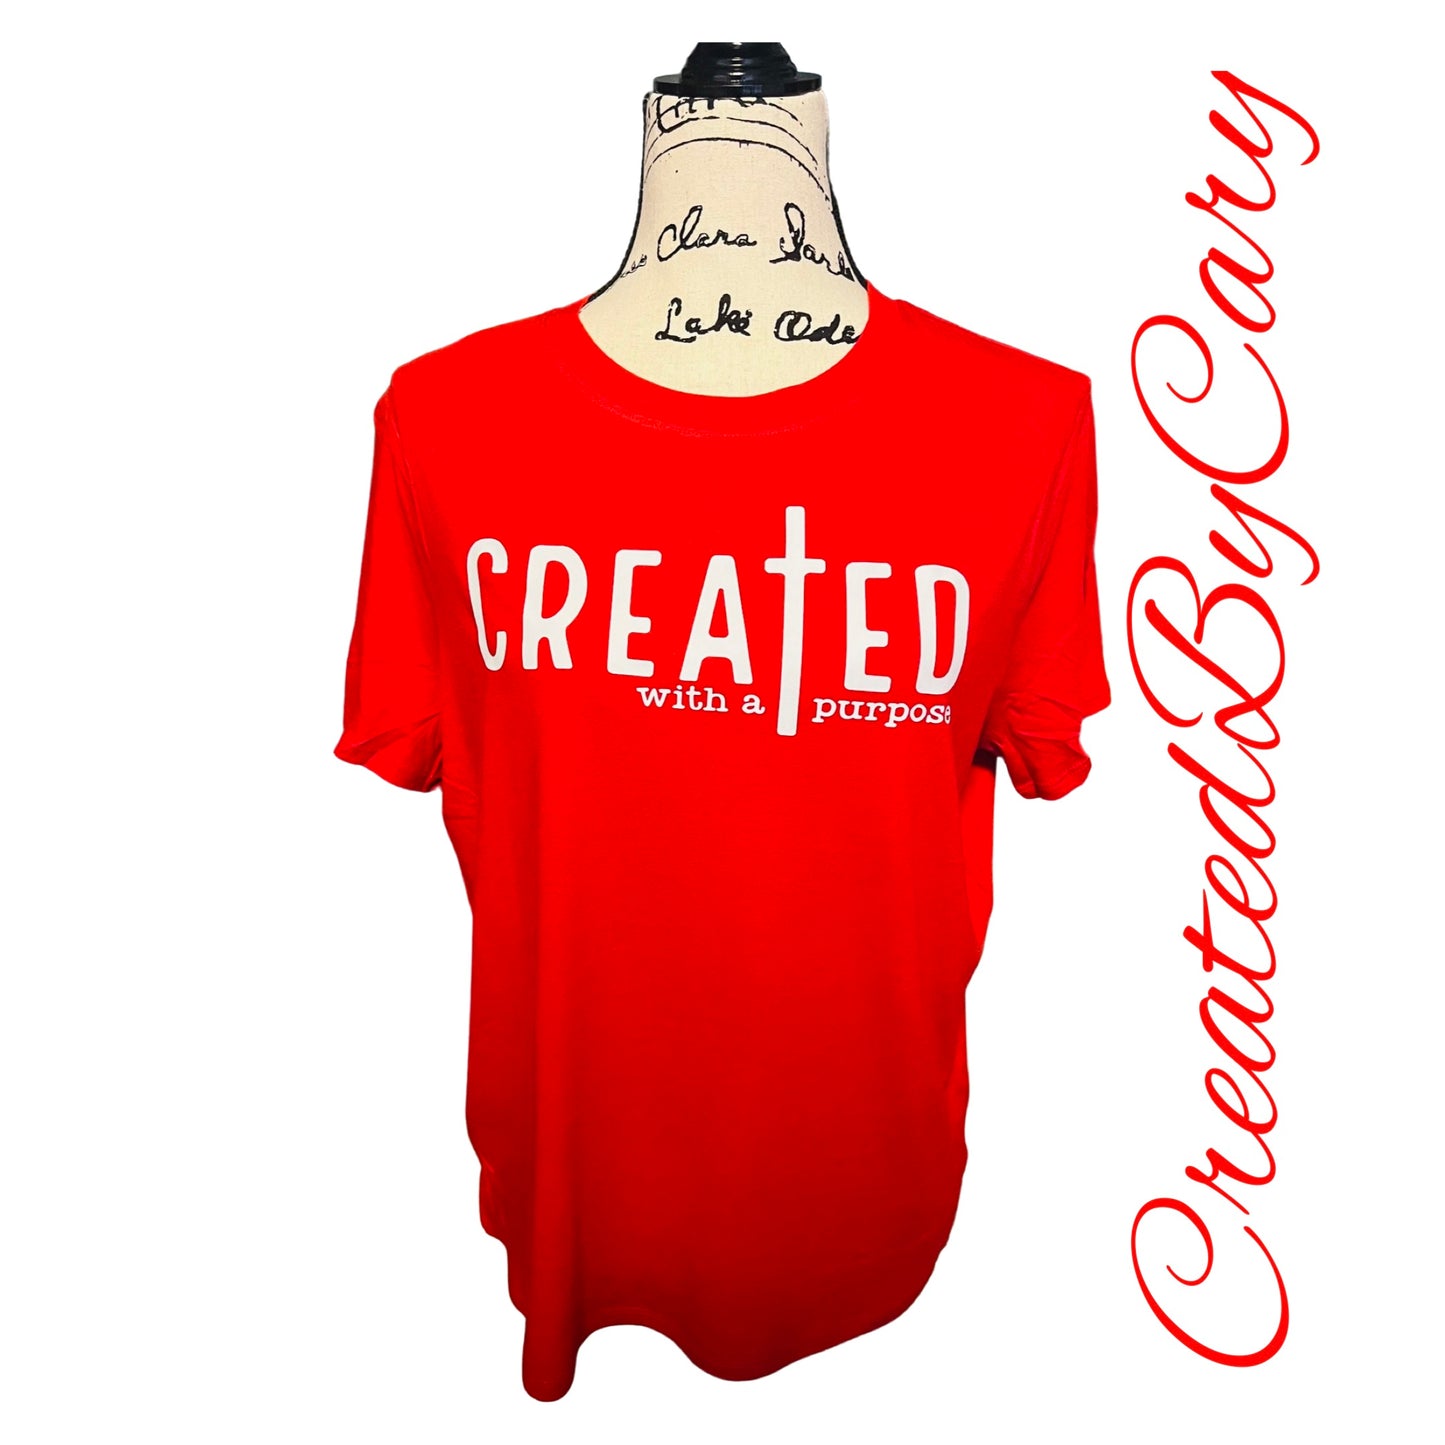 Created with a purpose t shirt